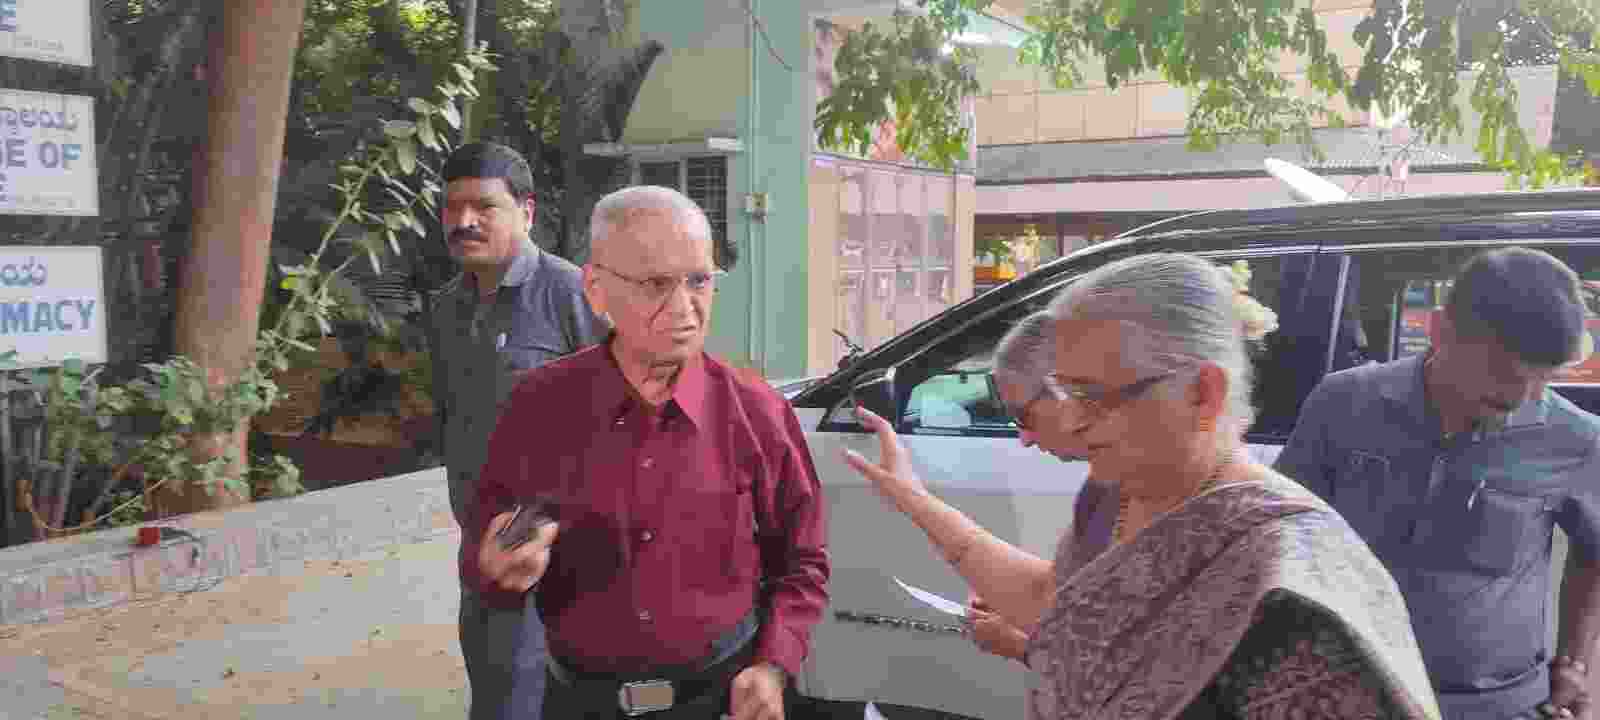 The second phase of Lok Sabha elections witnessed the active participation of renowned tech entrepreneur and Infosys co-founder, Narayana Murthy accompanied by his wife Sudha Murthy at the BES polling station in Bengaluru.